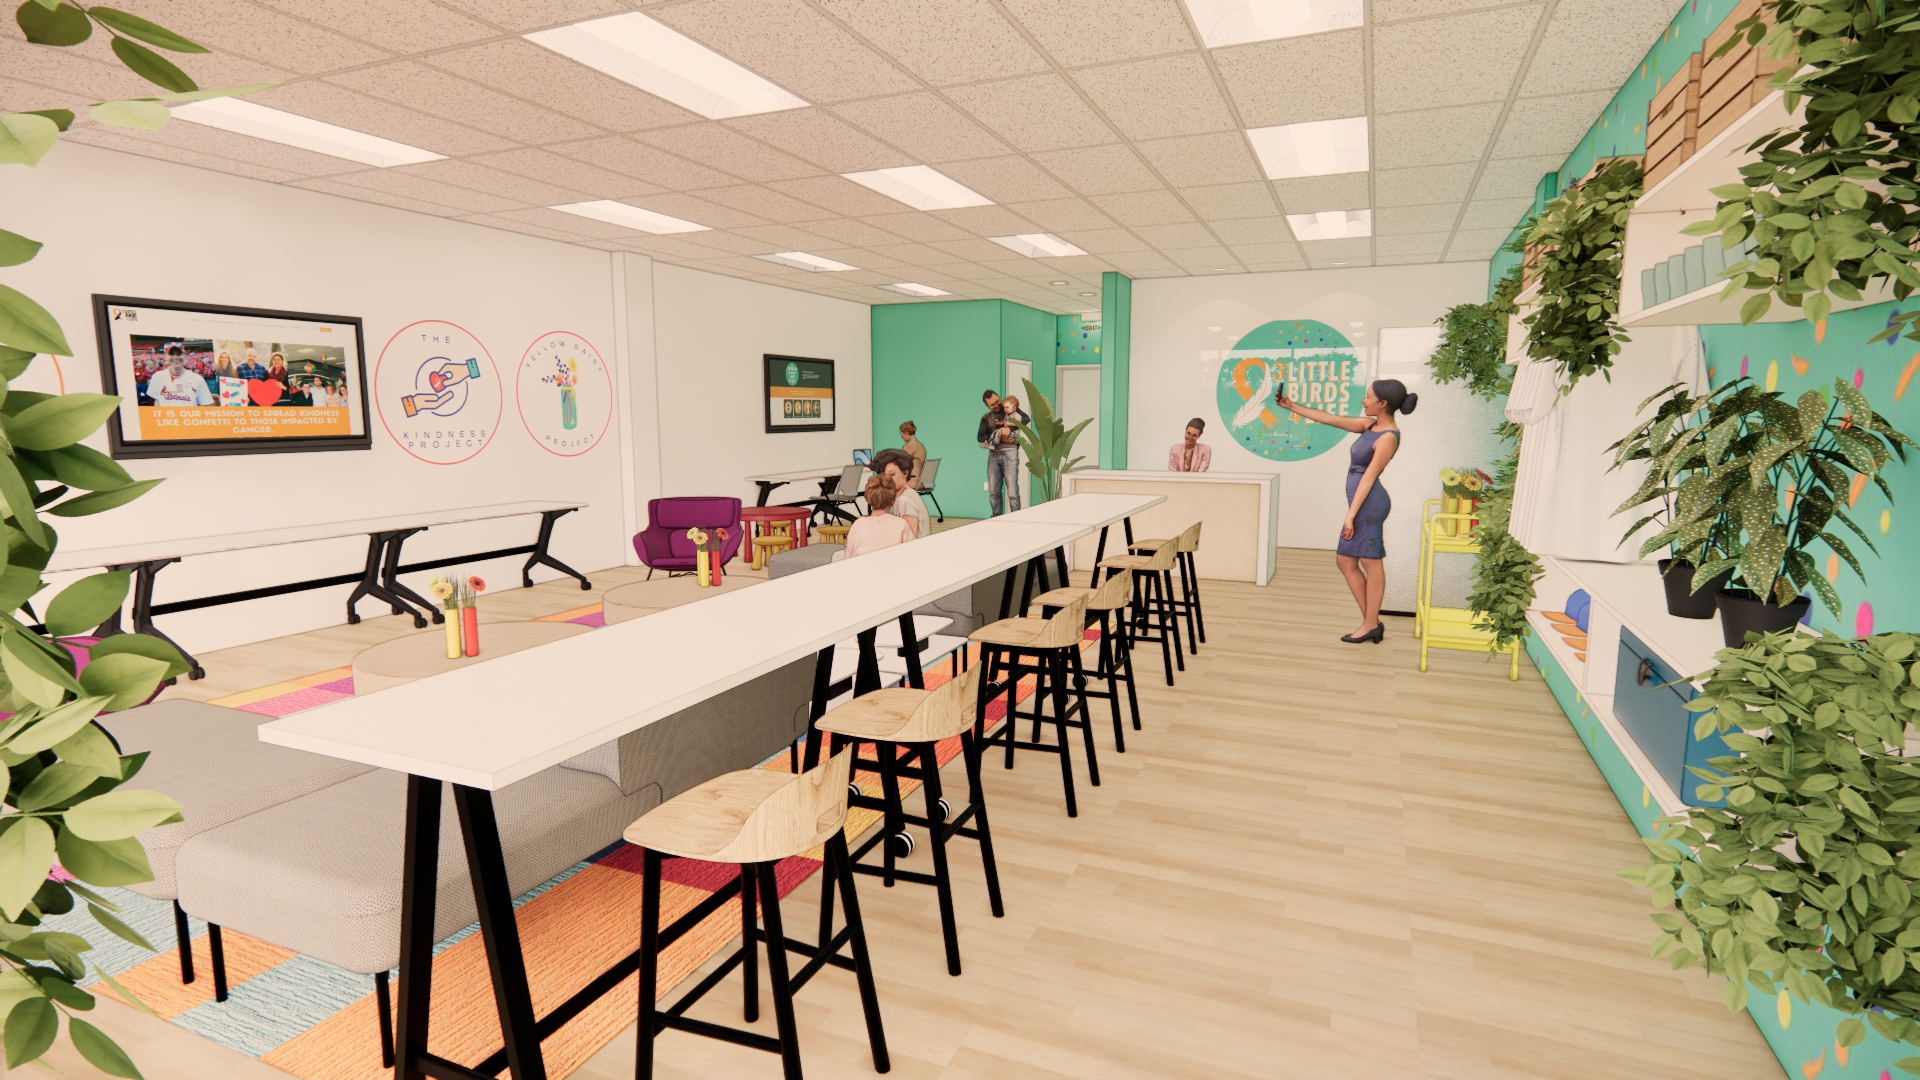 An architectural rendering showcasing a number of people enjoying a bright, open, positive space, with 3 Little Birds branding adorning the walls of the room